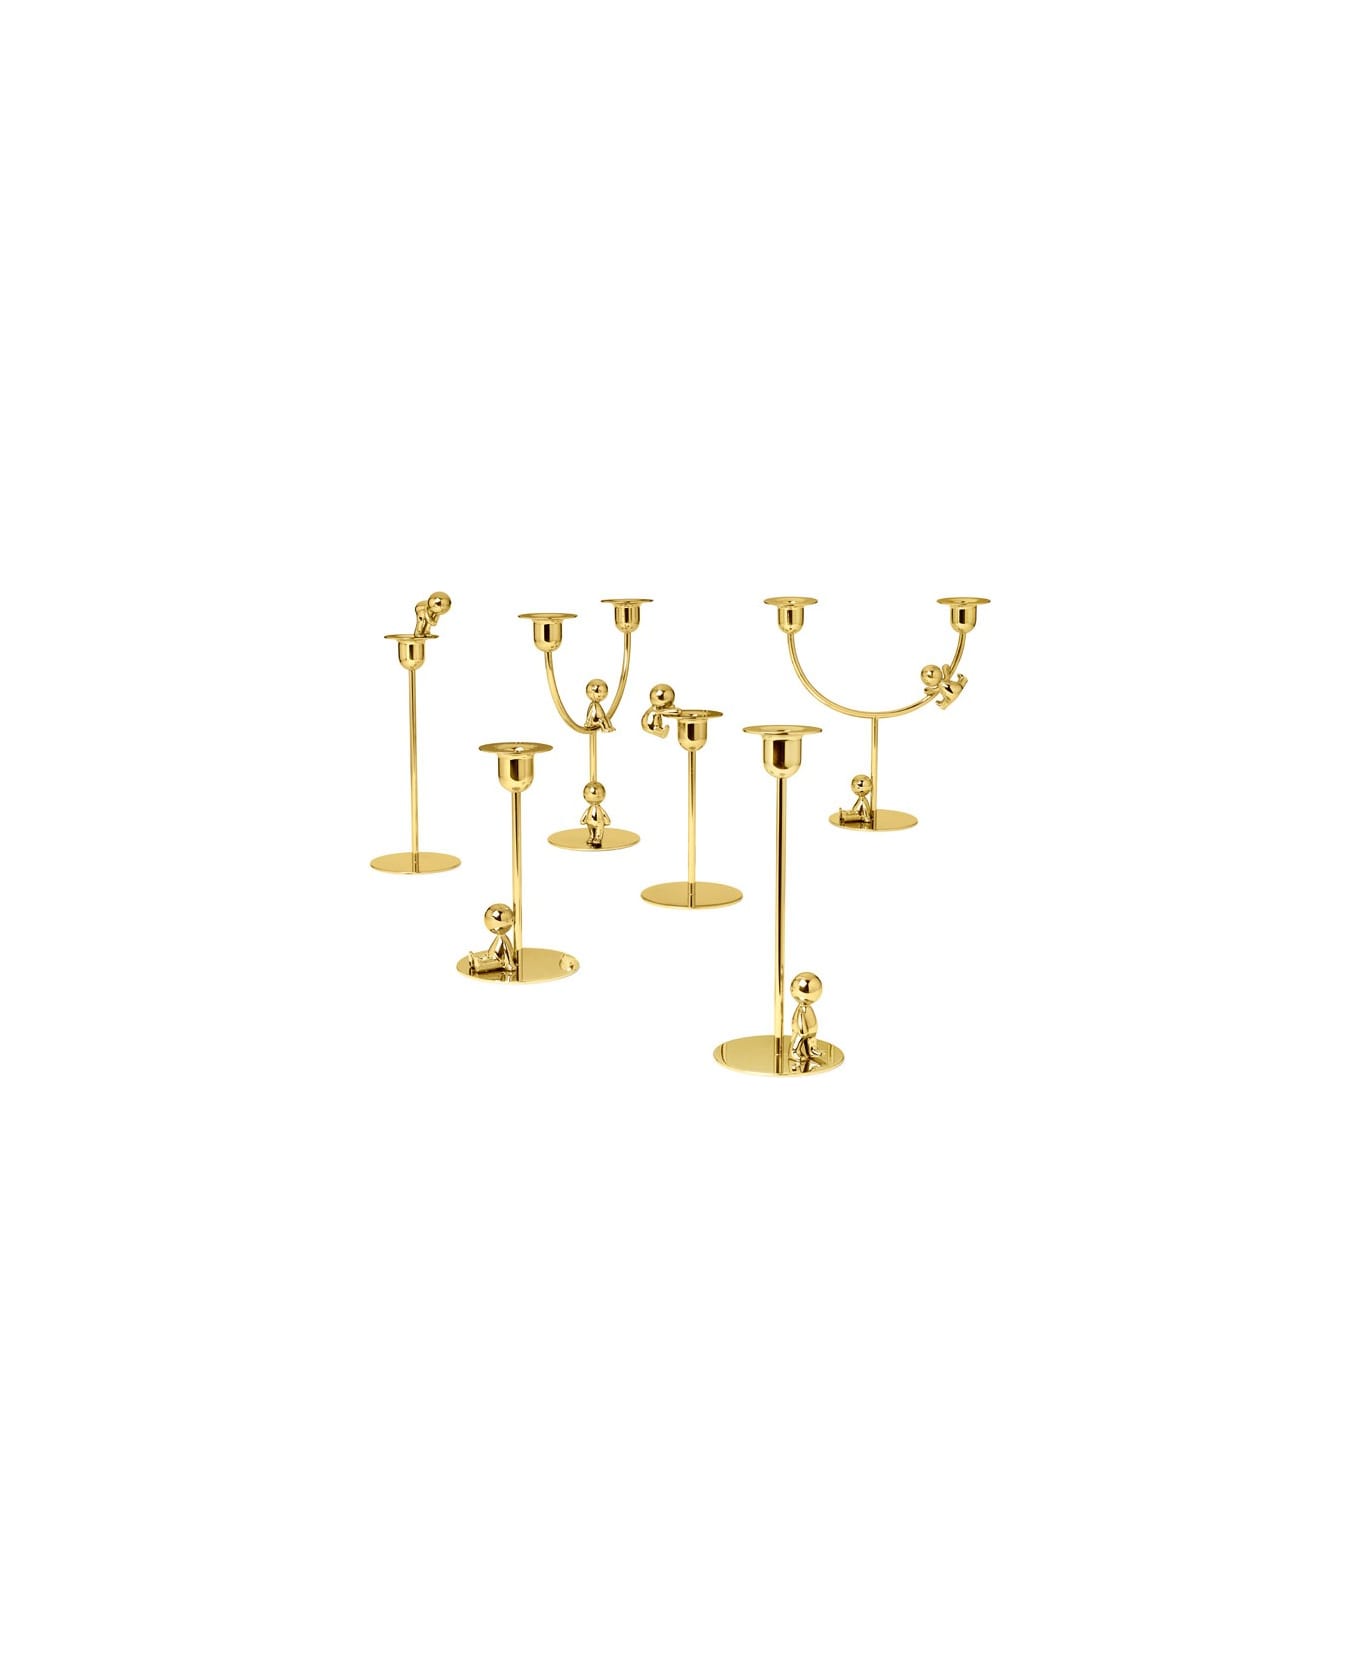 Ghidini 1961 Omini - The Climber Short Candlestick Polished Brass - Polished brass